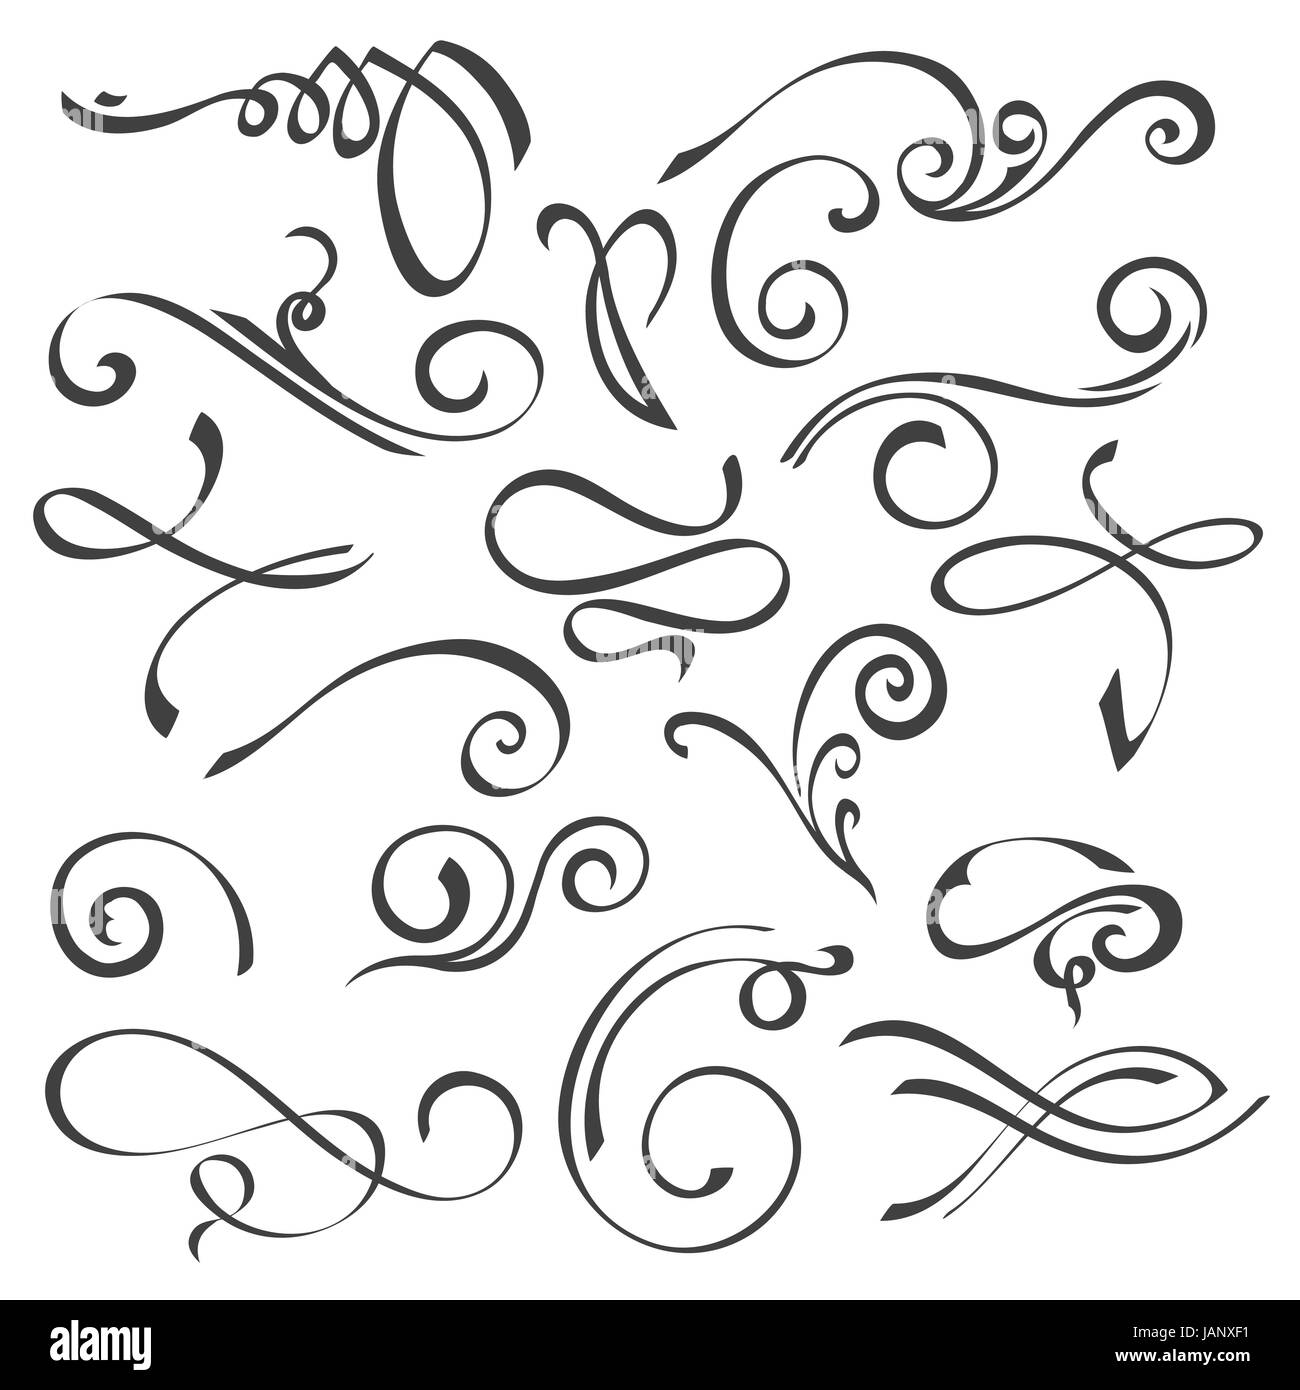 Hand drawn swirl ornate decoration elements. Quill pen calligraphy ...